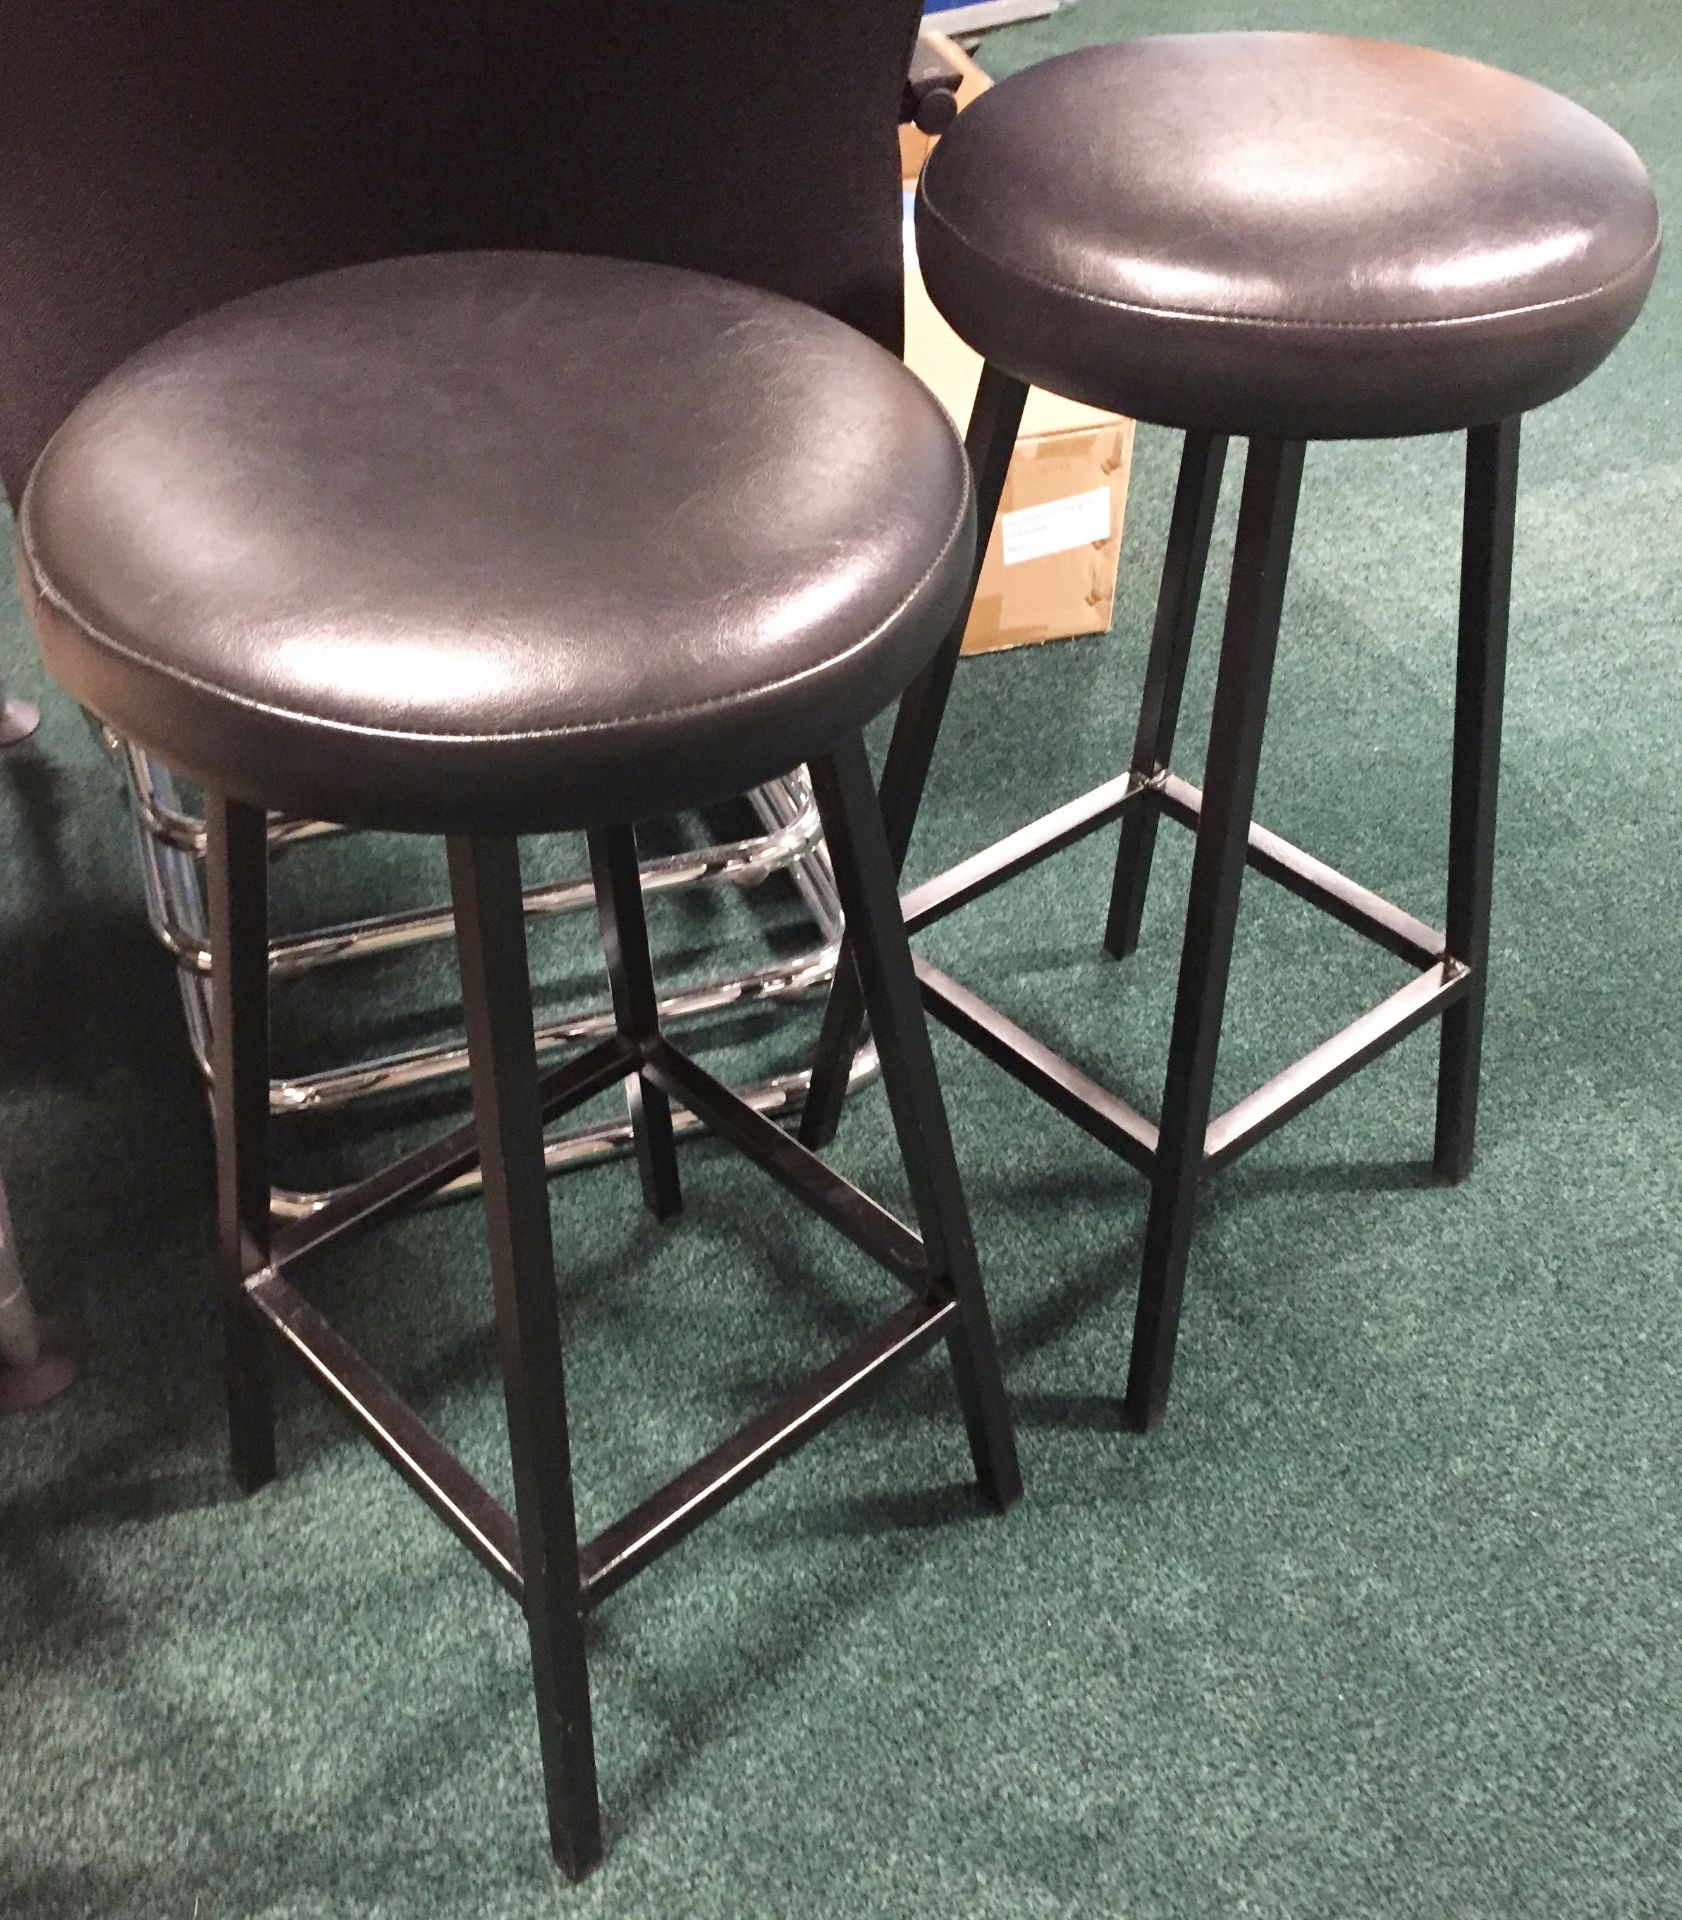 2 x Contemporary Black Bar Stools With Leather Cushioned Seats - Excellent Condition - CL198 -